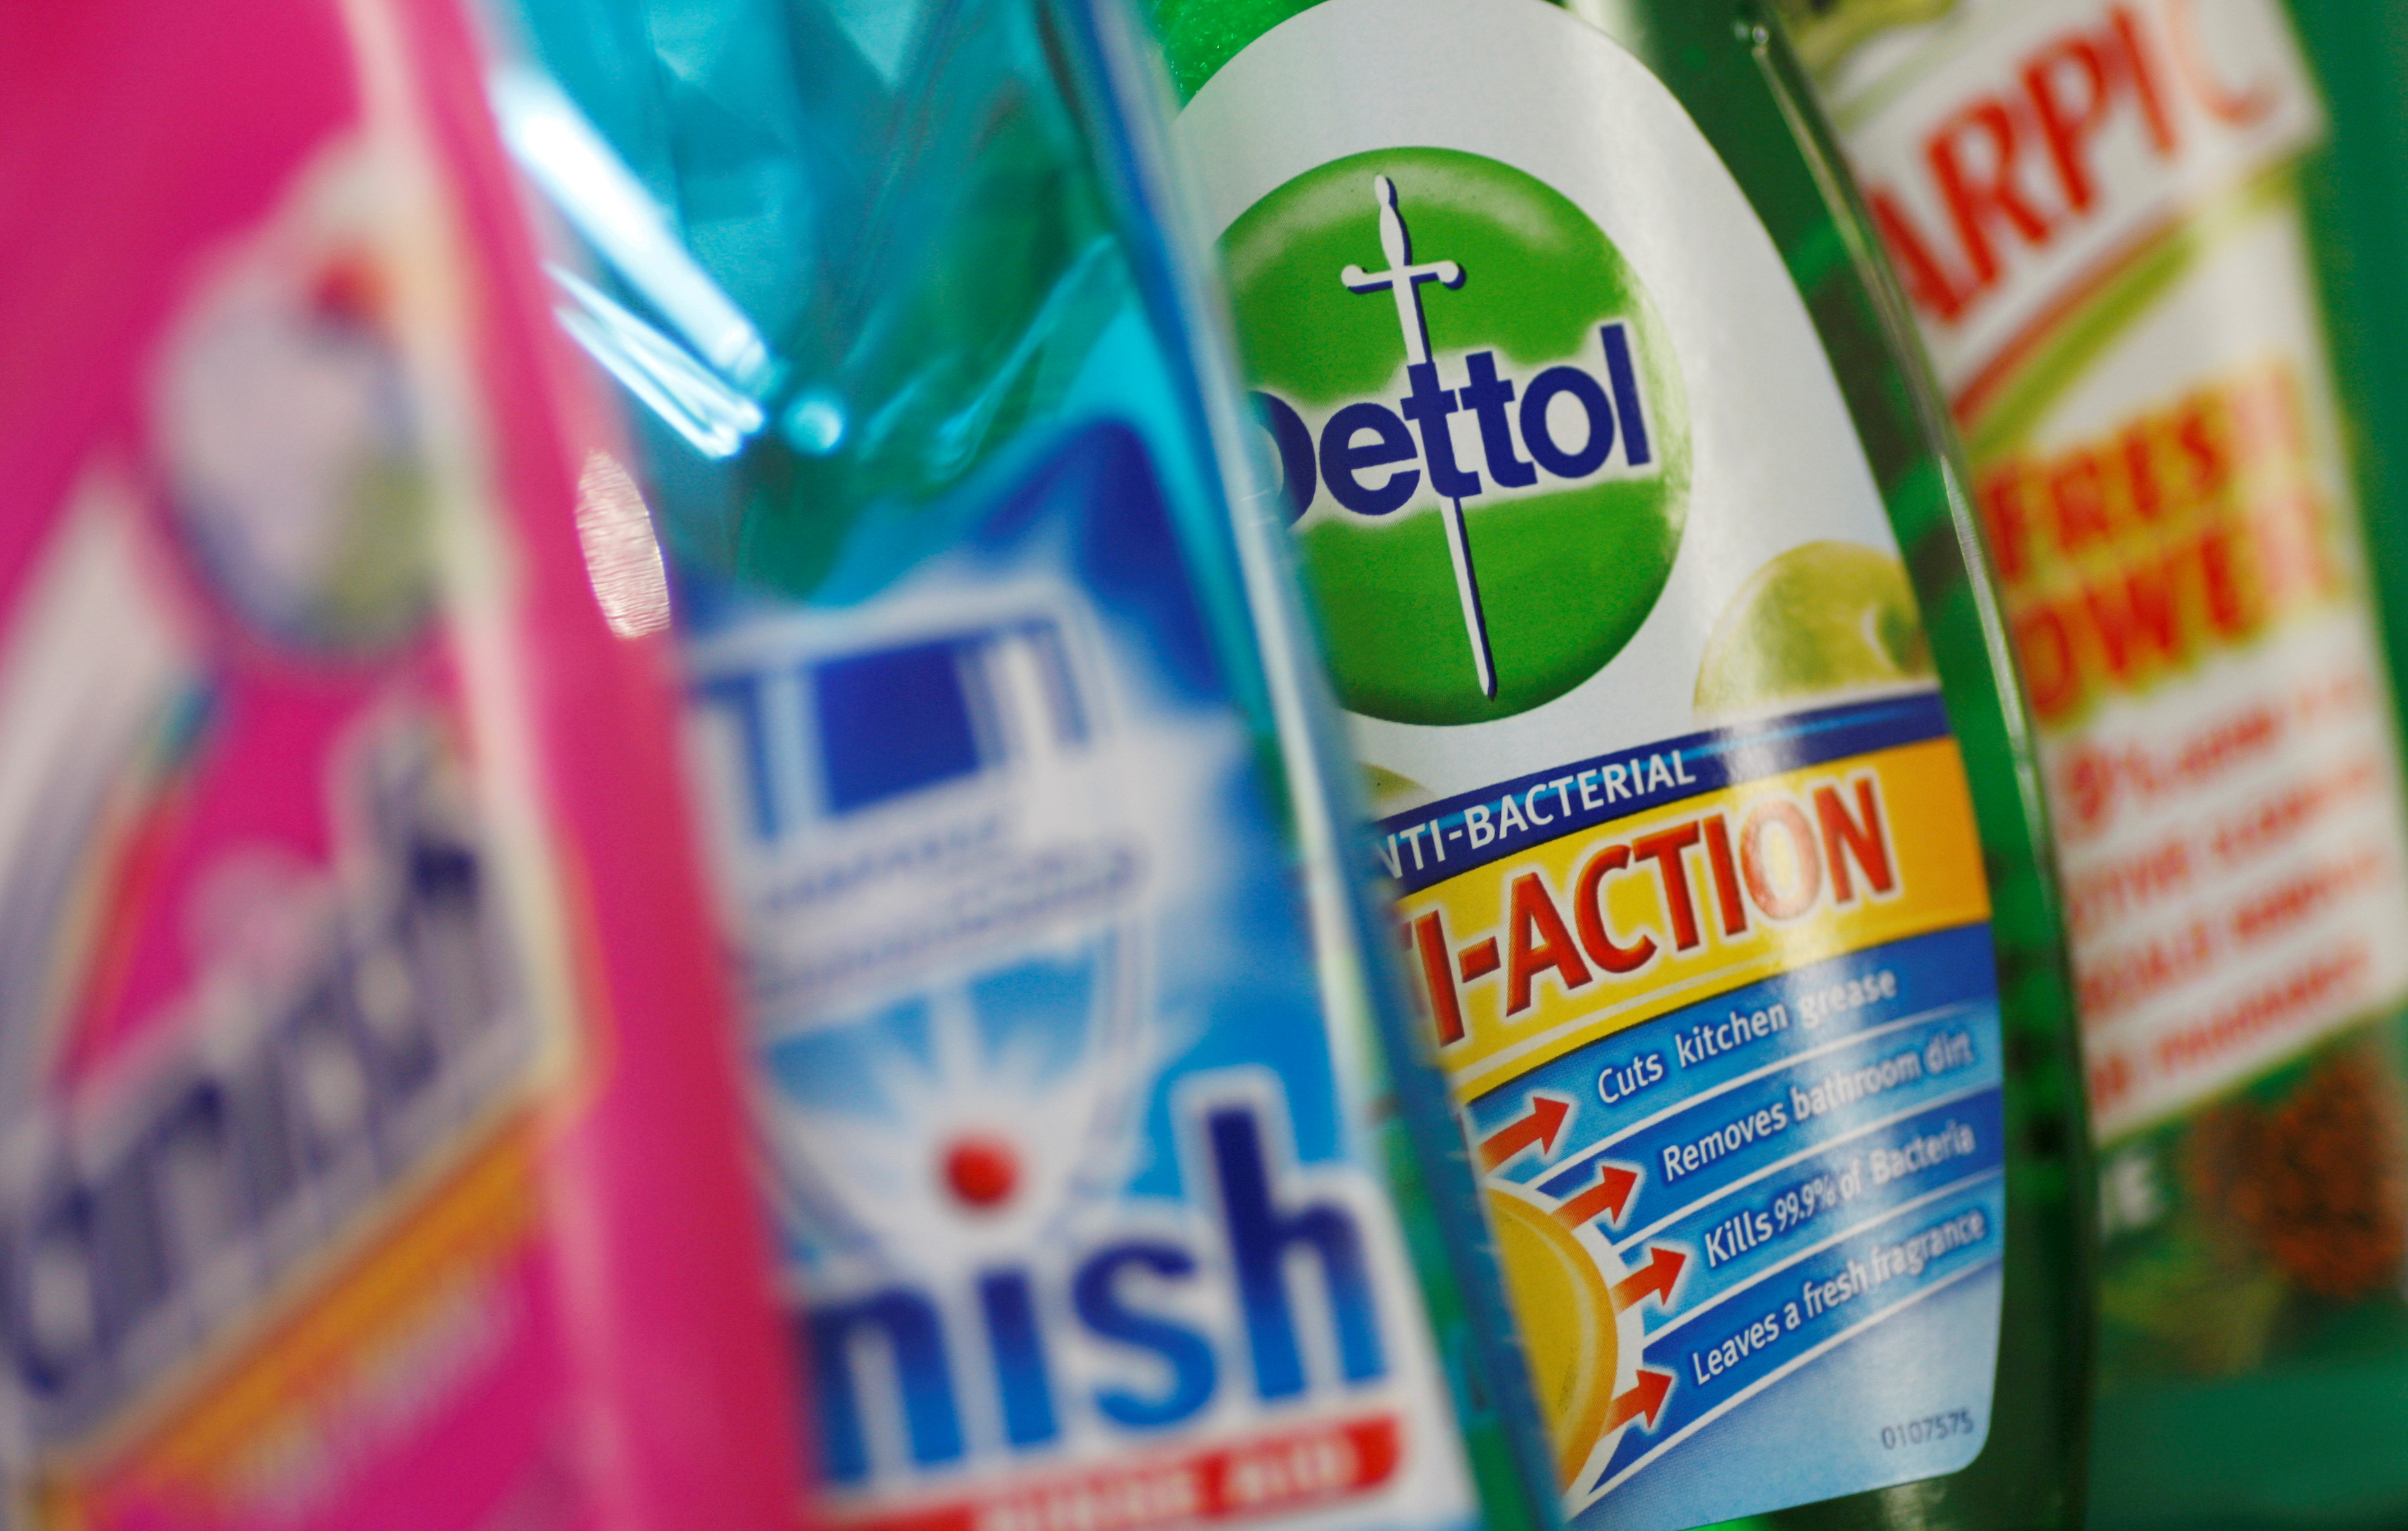 Products produced by Reckitt Benckiser are seen in London